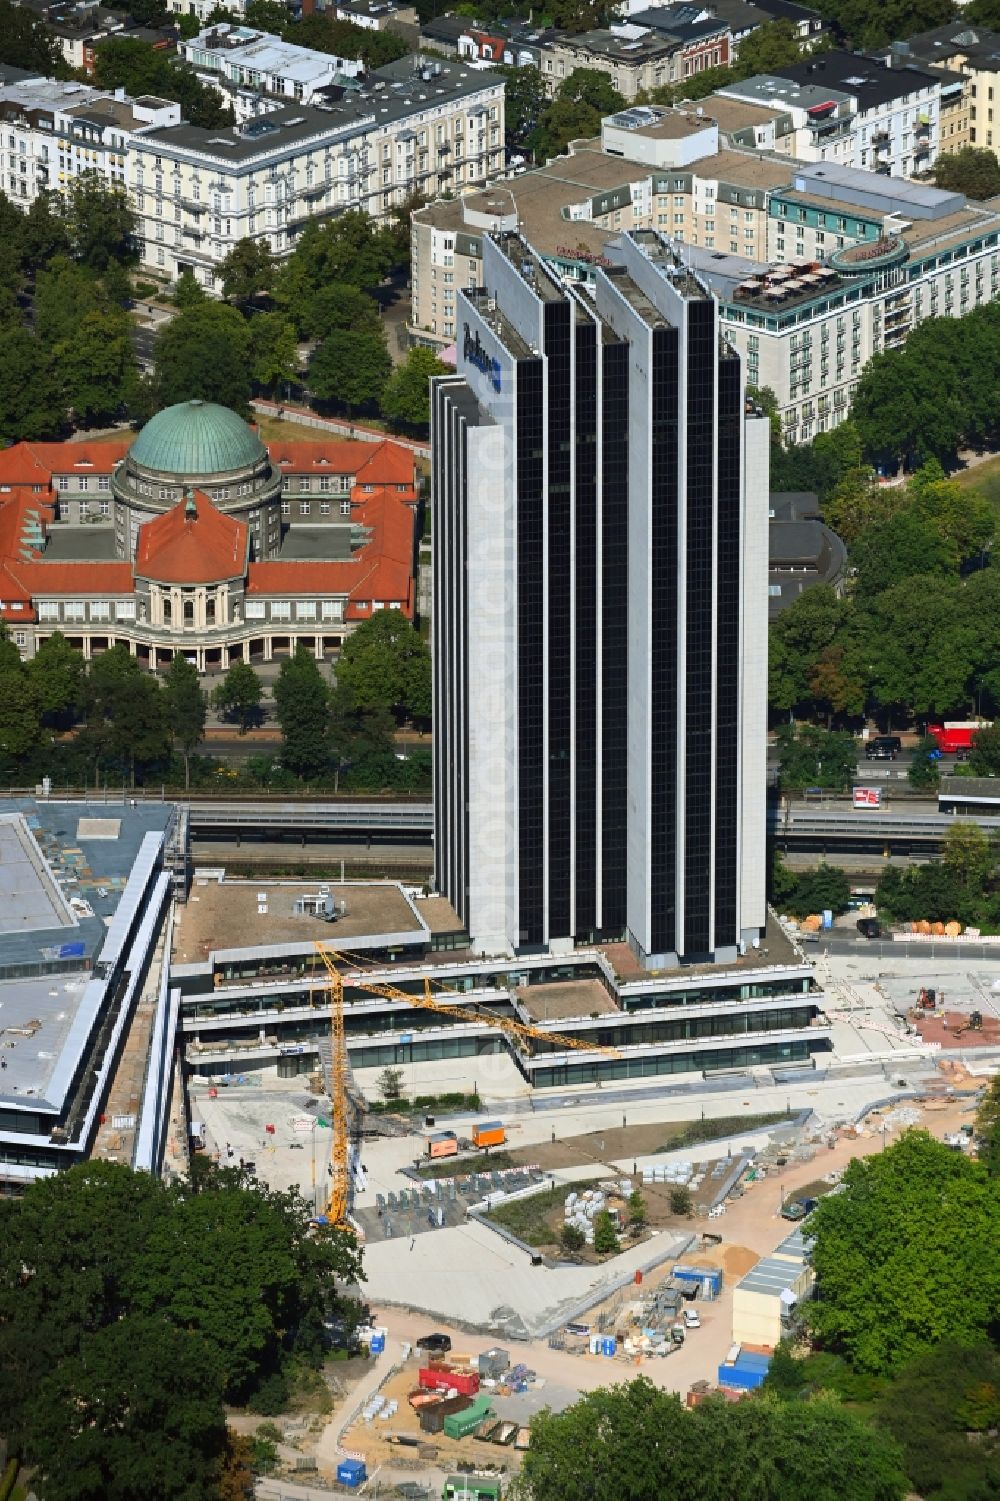 Hamburg from the bird's eye view: Renovation site of the Congress Center ( CCH ) on High-rise building of the hotel complex Radisson Blu on Marseiller Strasse in Hamburg, Germany